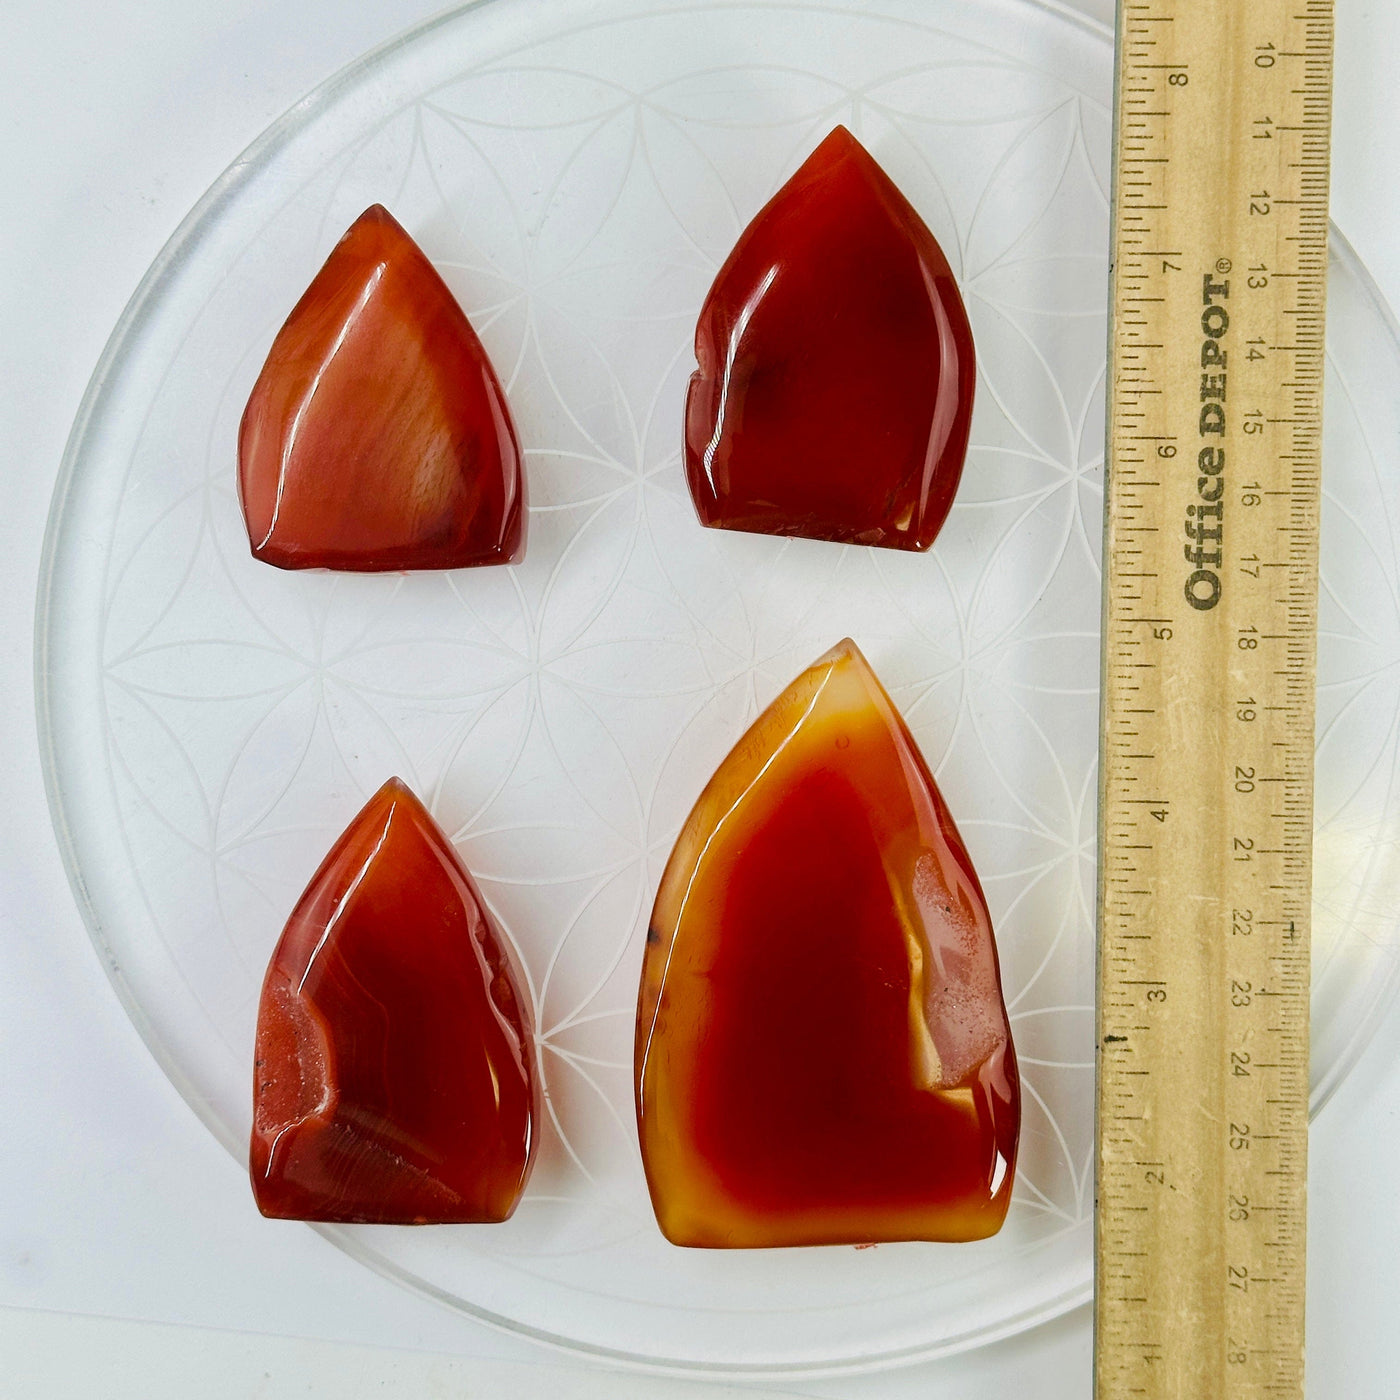 Carnelian Polished Cut Base - You Choose all 4 variants with ruler for size reference